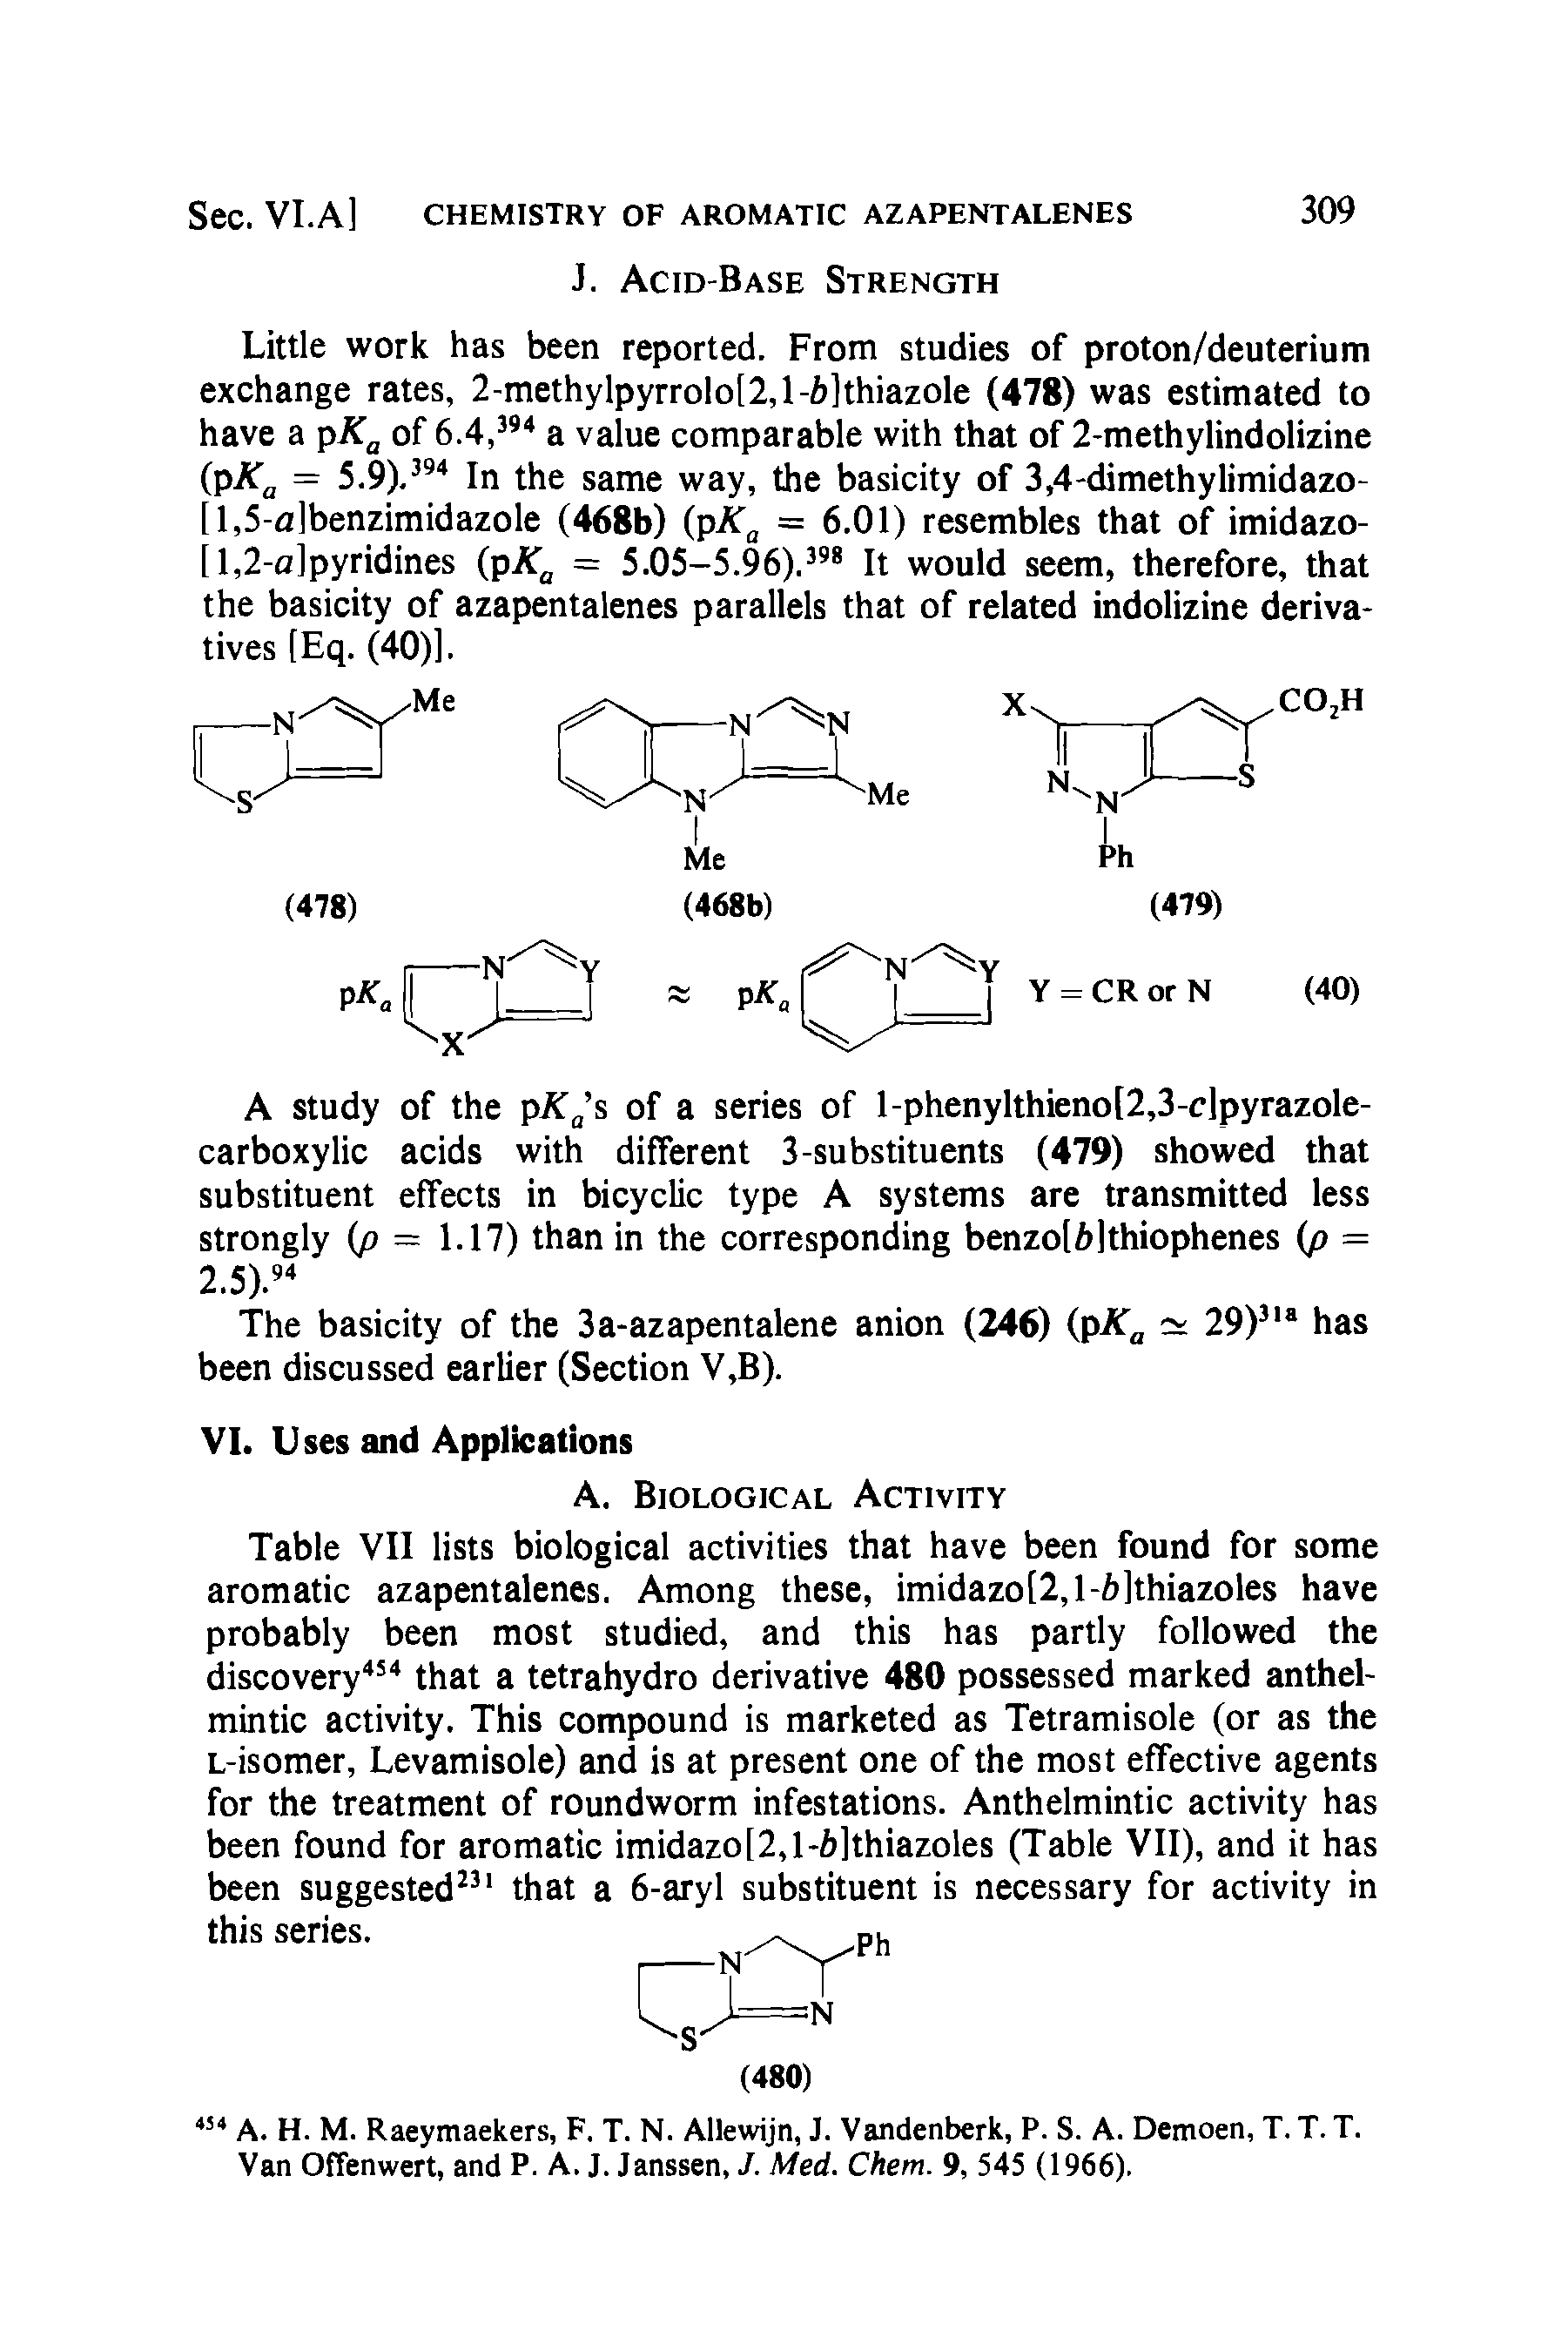 Table VII lists biological activities that have been found for some aromatic azapentalenes. Among these, imidazo[2,l-6]thiazoles have probably been most studied, and this has partly followed the discovery454 that a tetrahydro derivative 480 possessed marked anthelmintic activity. This compound is marketed as Tetramisole (or as the L-isomer, Levamisole) and is at present one of the most effective agents for the treatment of roundworm infestations. Anthelmintic activity has been found for aromatic imidazo[2,l-6]thiazoles (Table VII), and it has been suggested331 that a 6-aryl substituent is necessary for activity in this series.